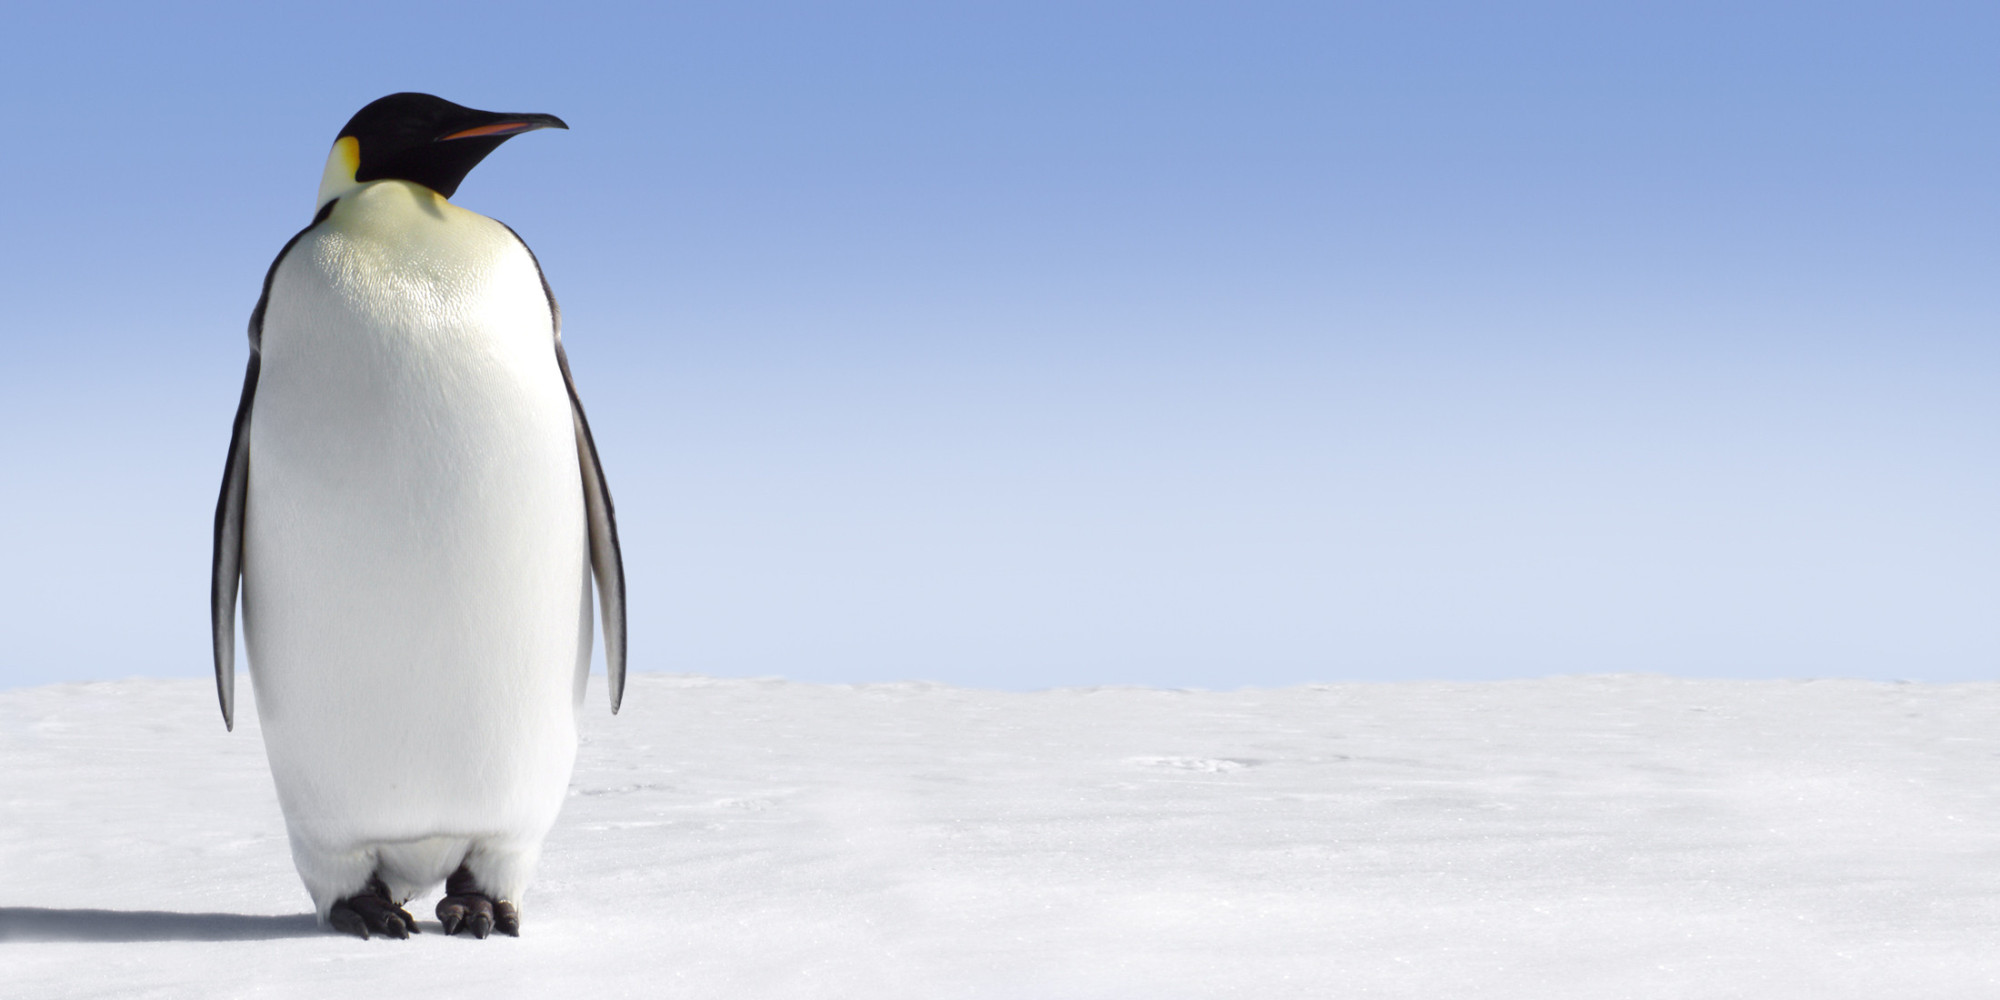 Penguin Photography download best photo at